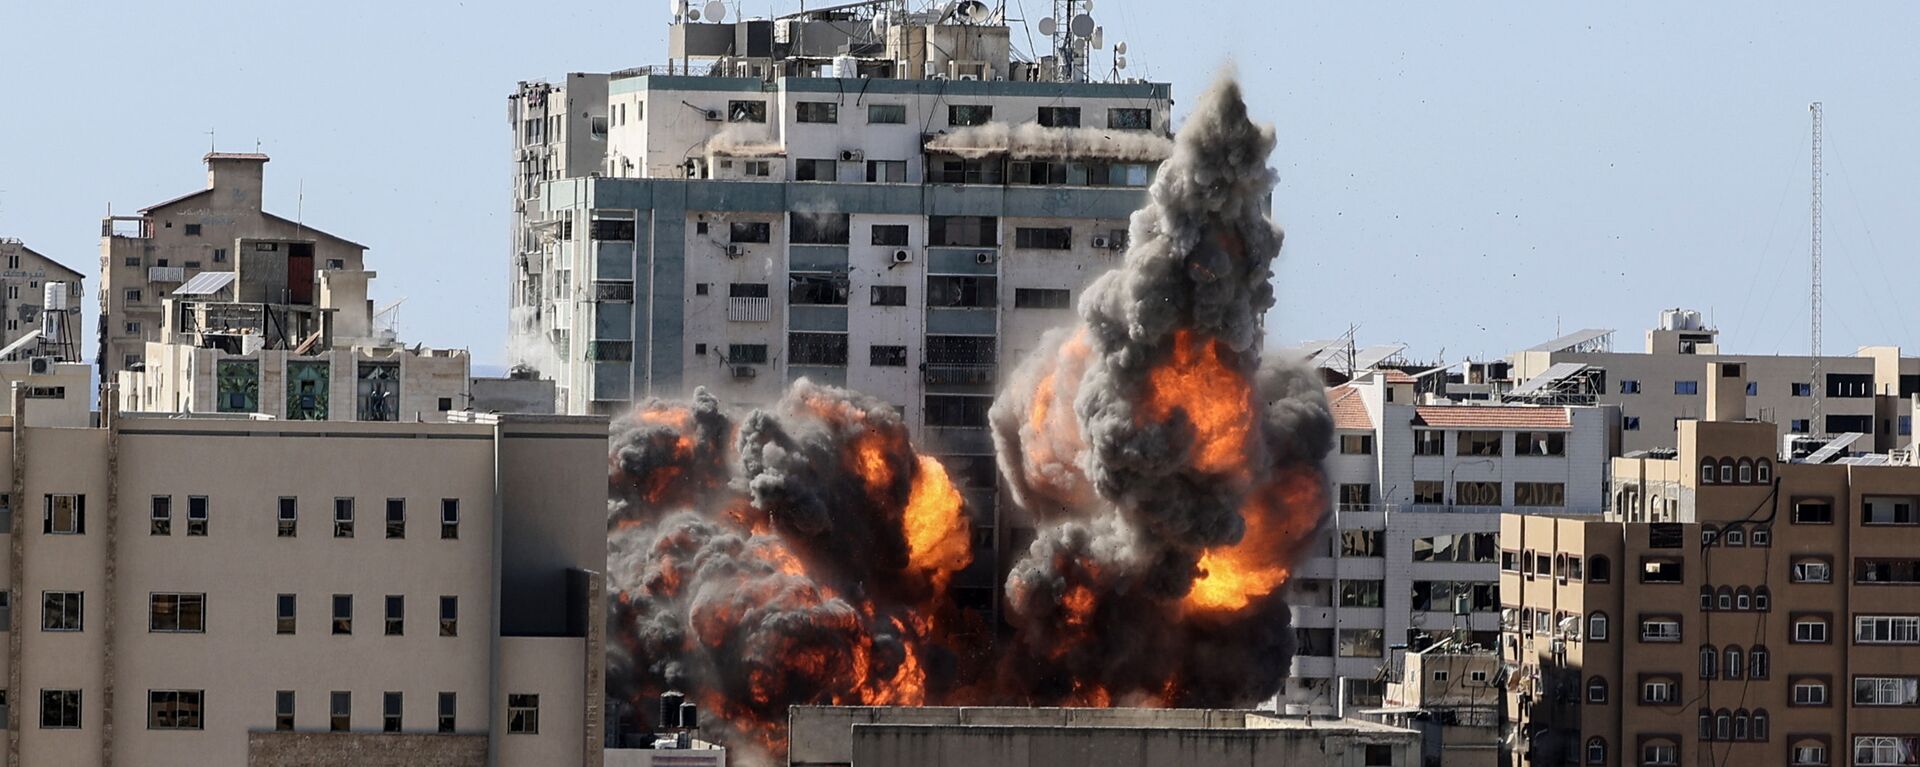 Smoke billows from a building housing various international media, including The Associated Press, after an Israeli airstrike on Saturday, May 15, 2021 in Gaza City. - Sputnik International, 1920, 11.06.2021